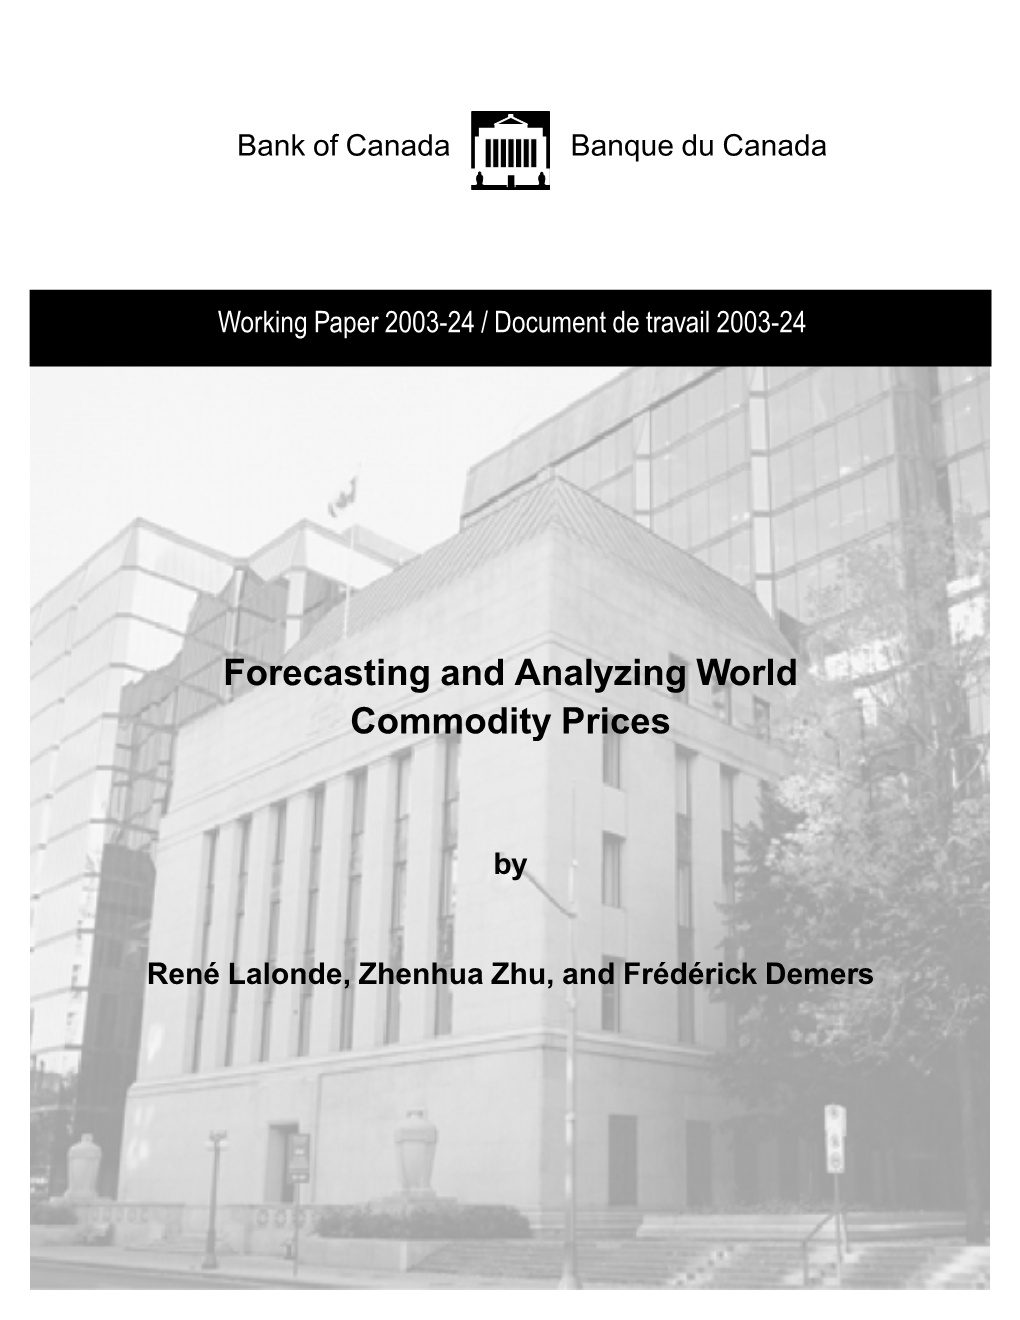 Forecasting and Analyzing World Commodity Prices